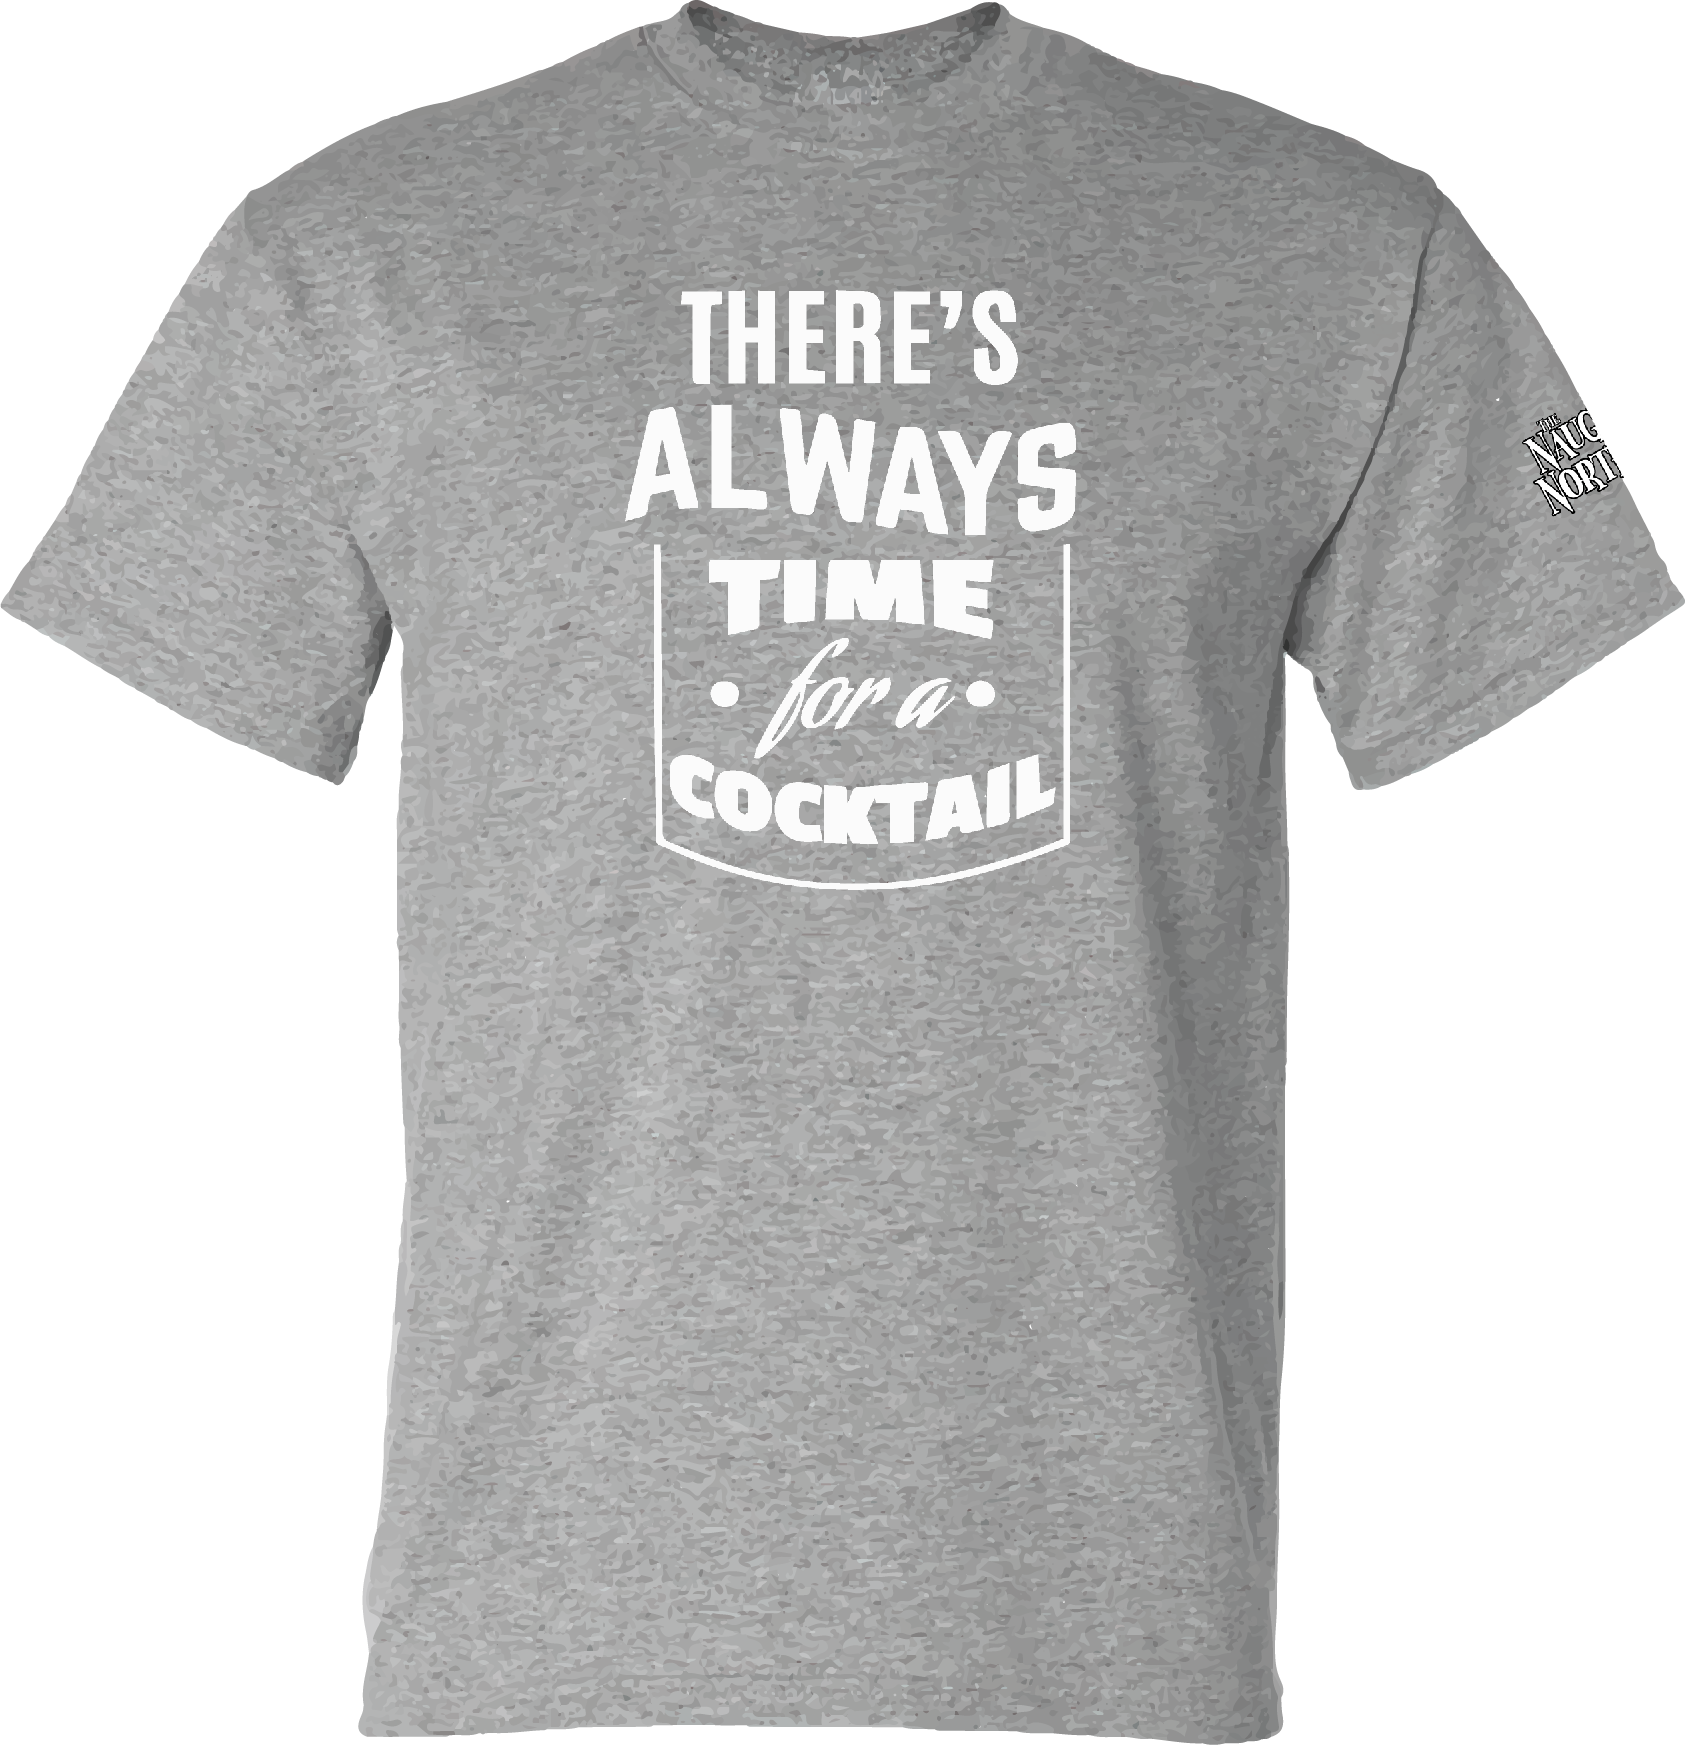 There's Always Time For a Cocktail T-Shirt